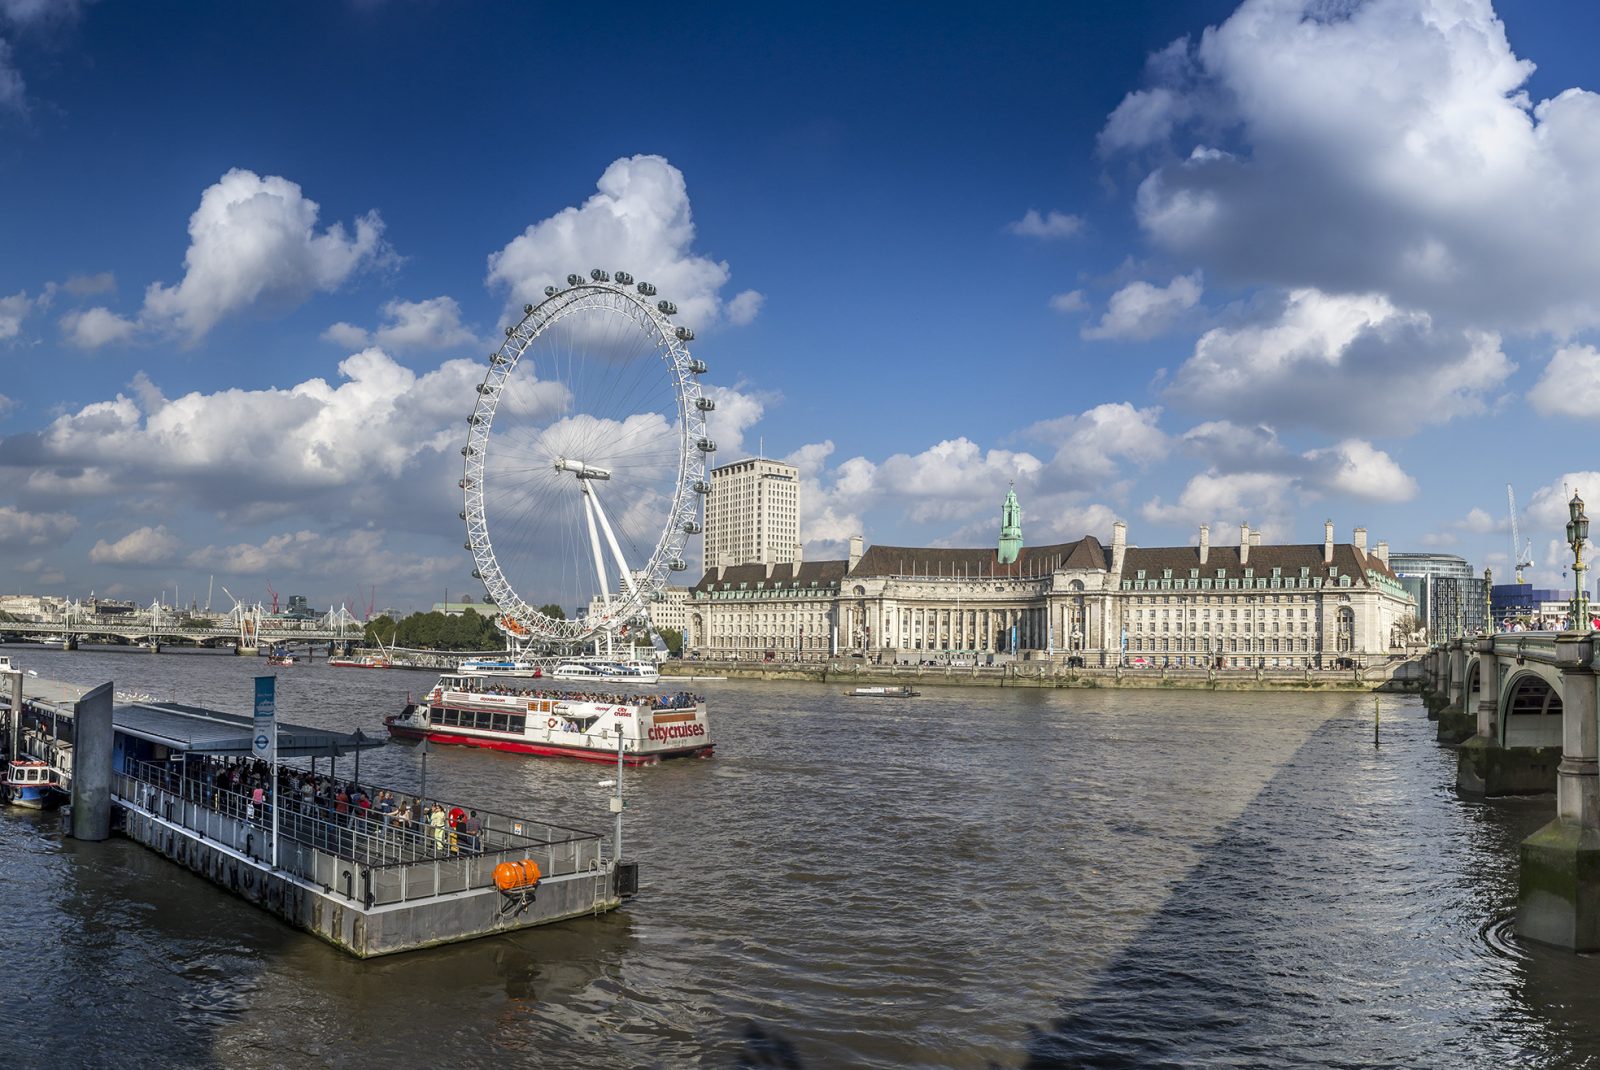 Sunday City Guide: What to do in London, UK